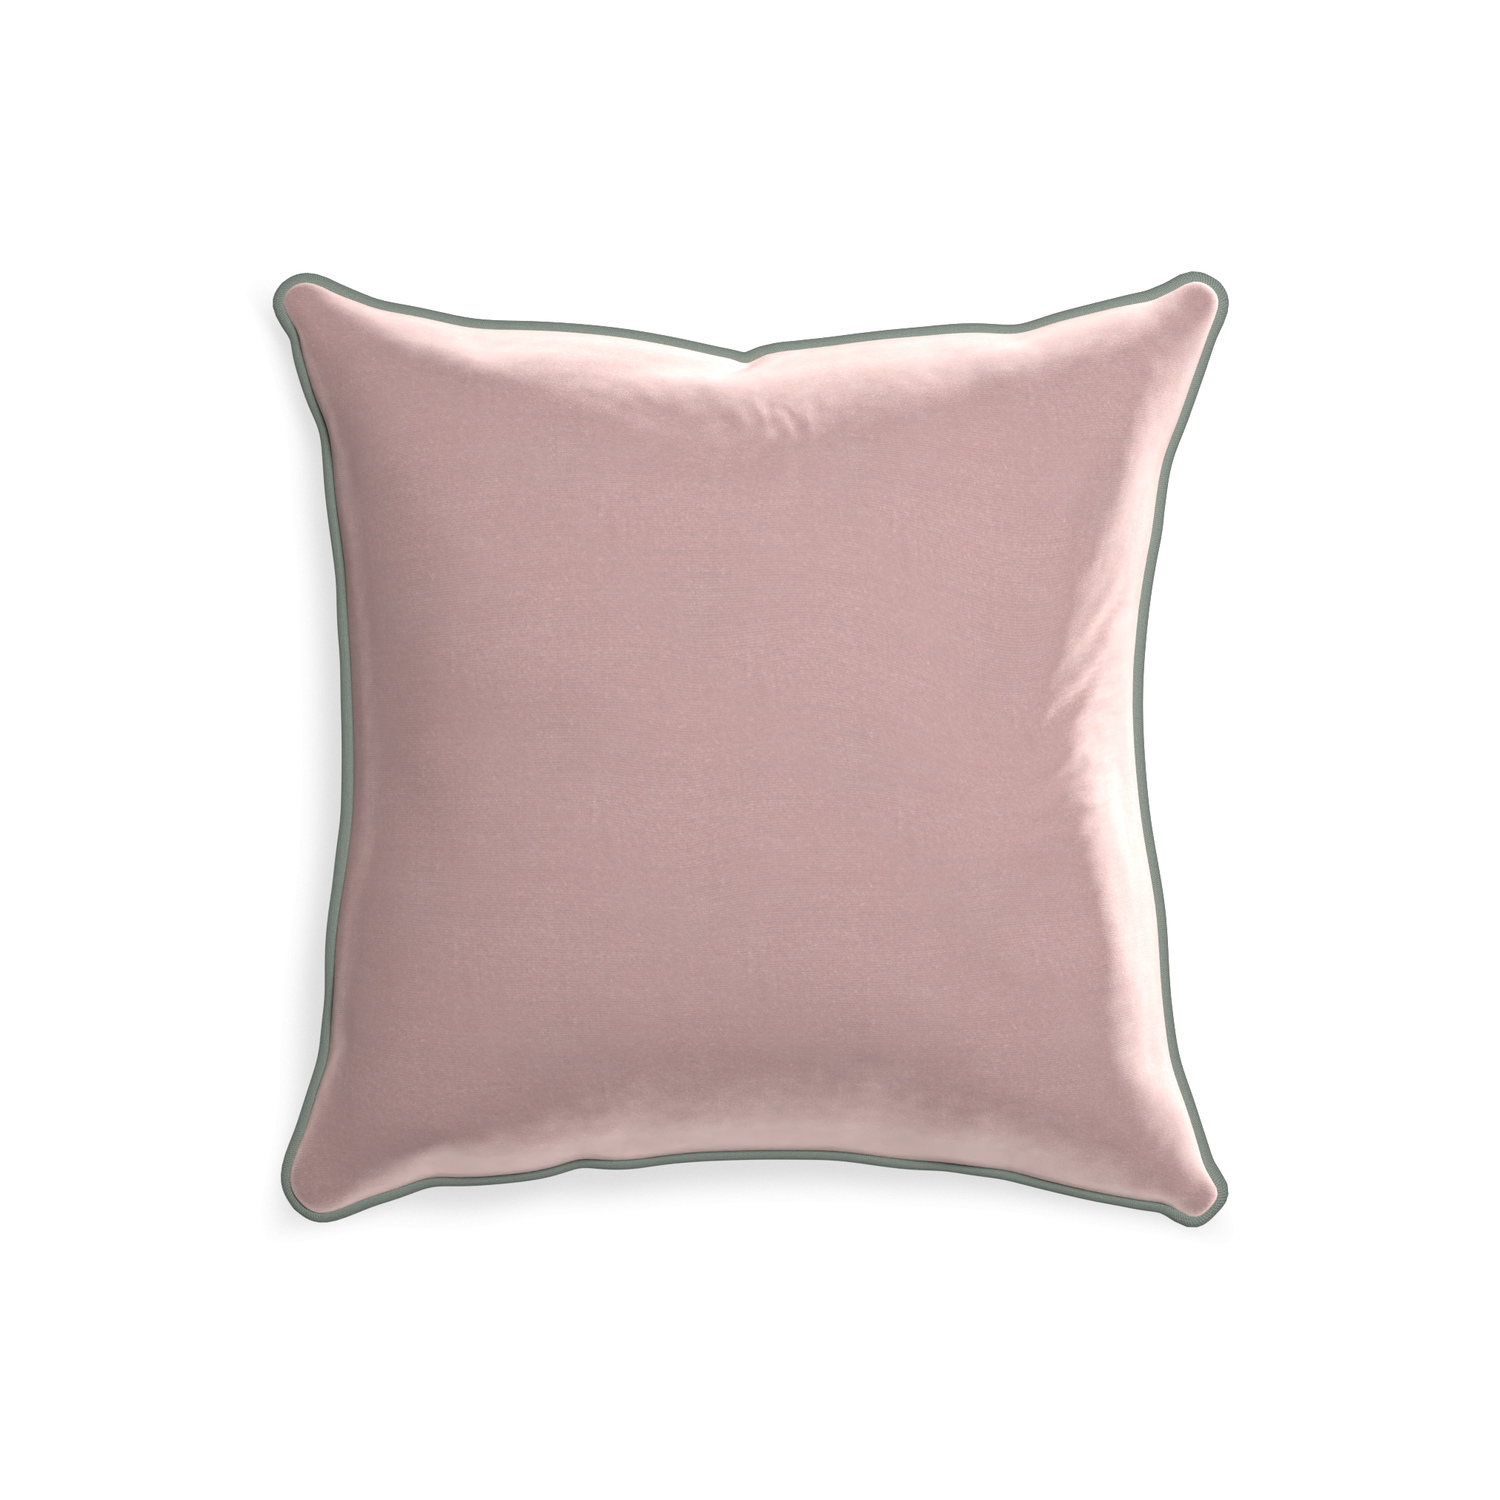 20-square mauve velvet custom mauvepillow with sage piping on white background